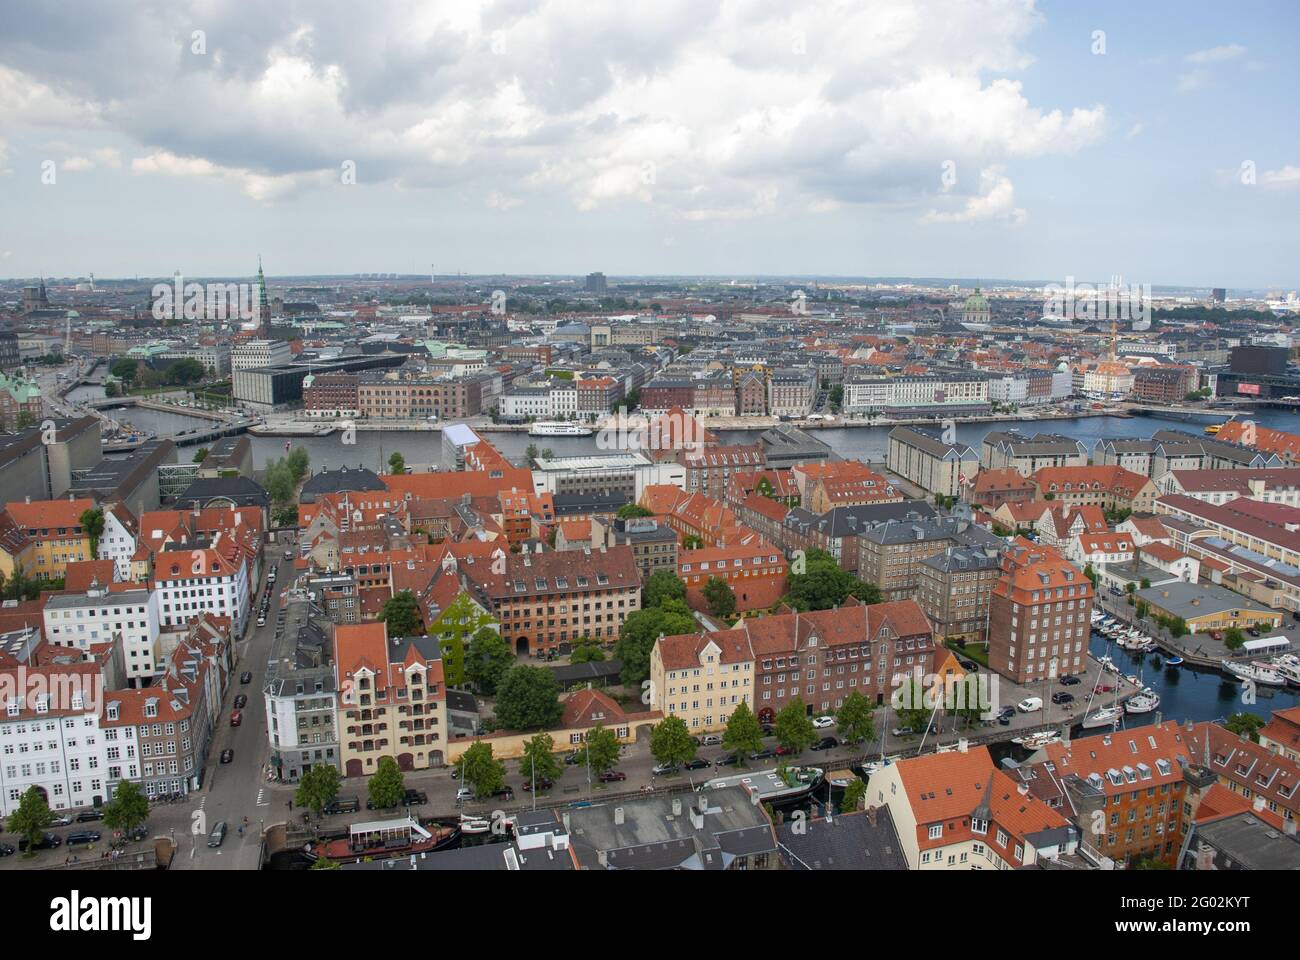 Aerial or drone view over the city Denmark Stock Photo - Alamy